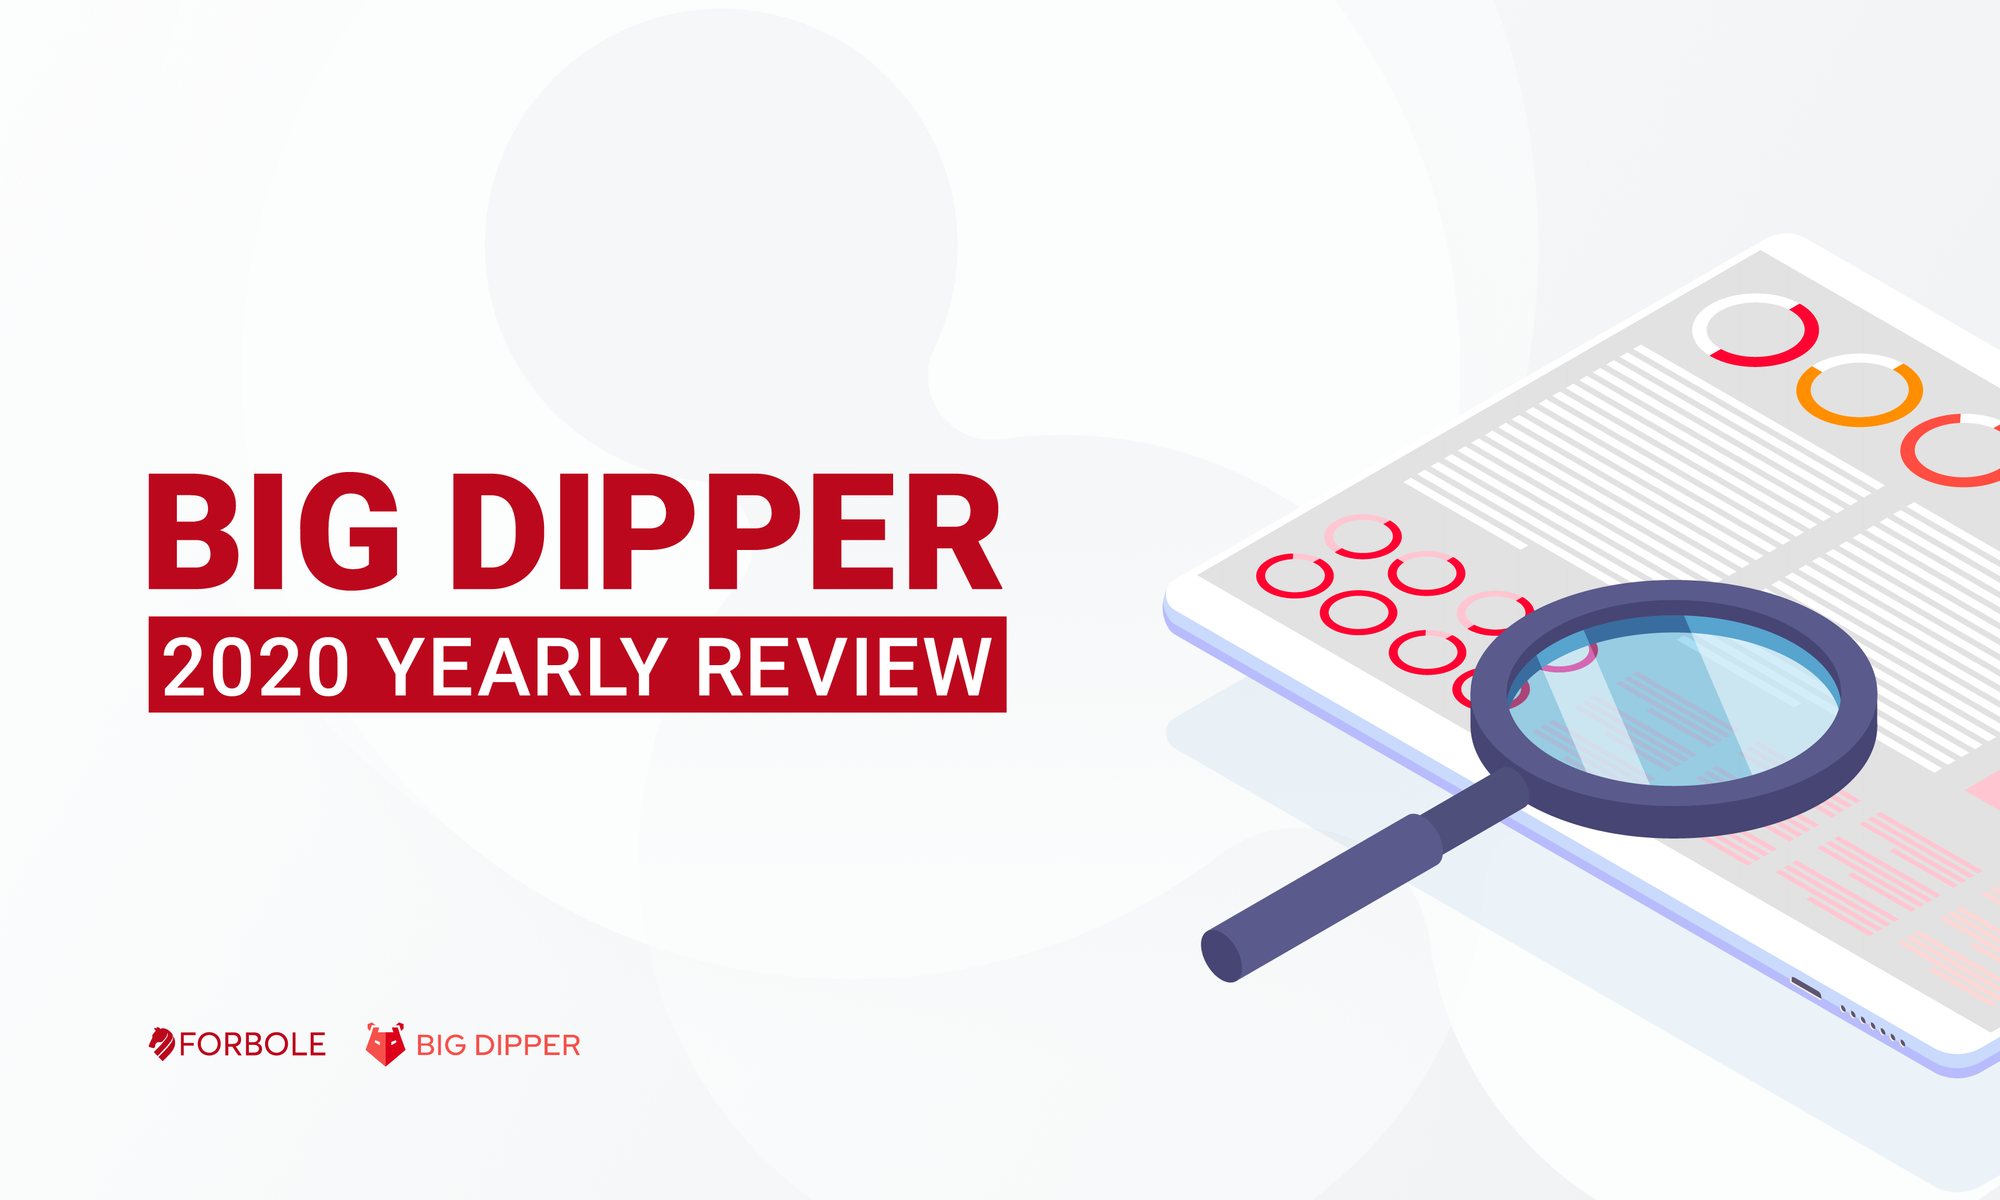 Big Dipper 2020 Yearly Review